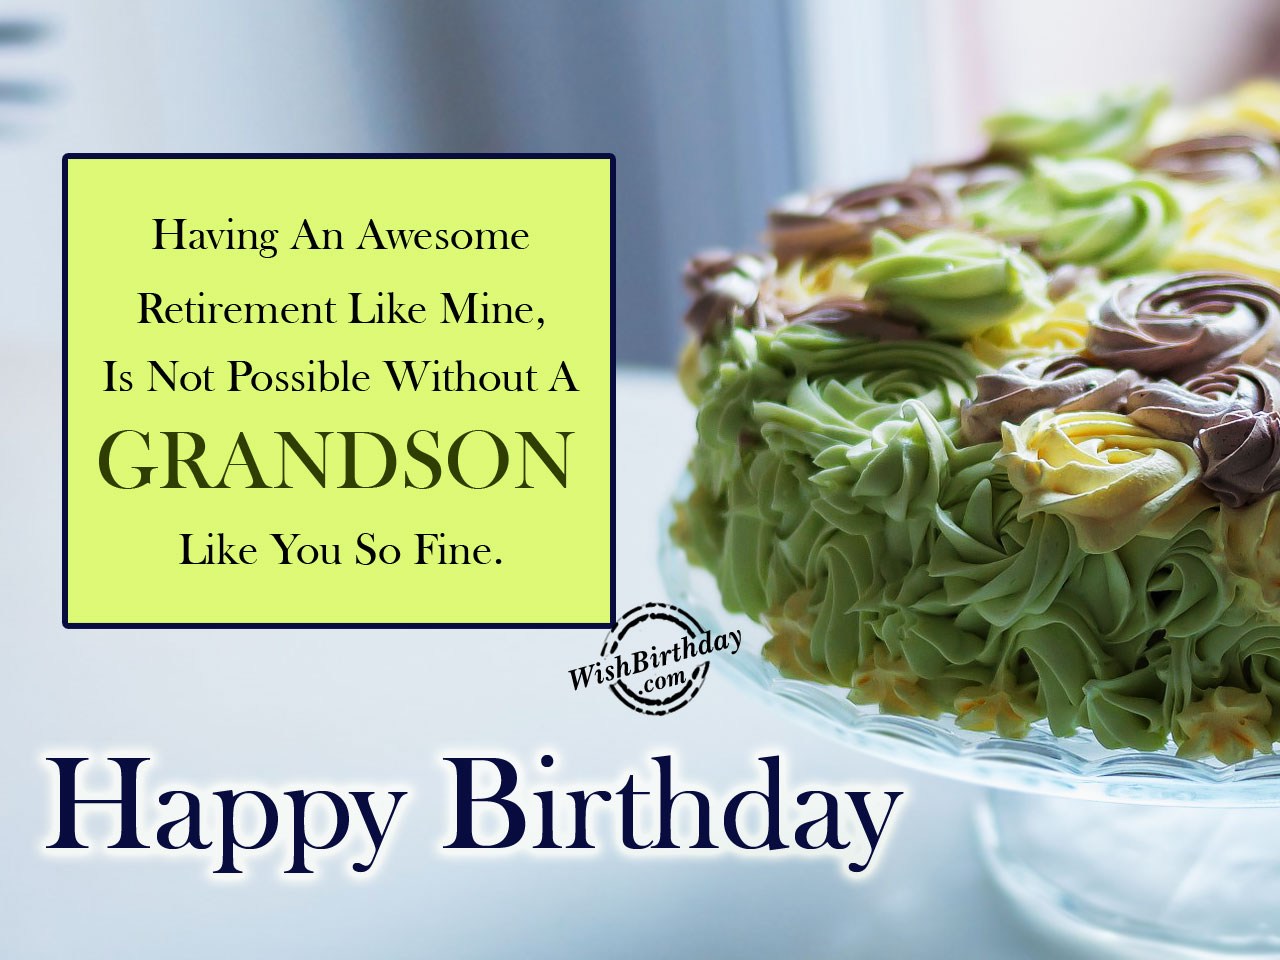 birthday-wishes-for-grandson-birthday-images-pictures